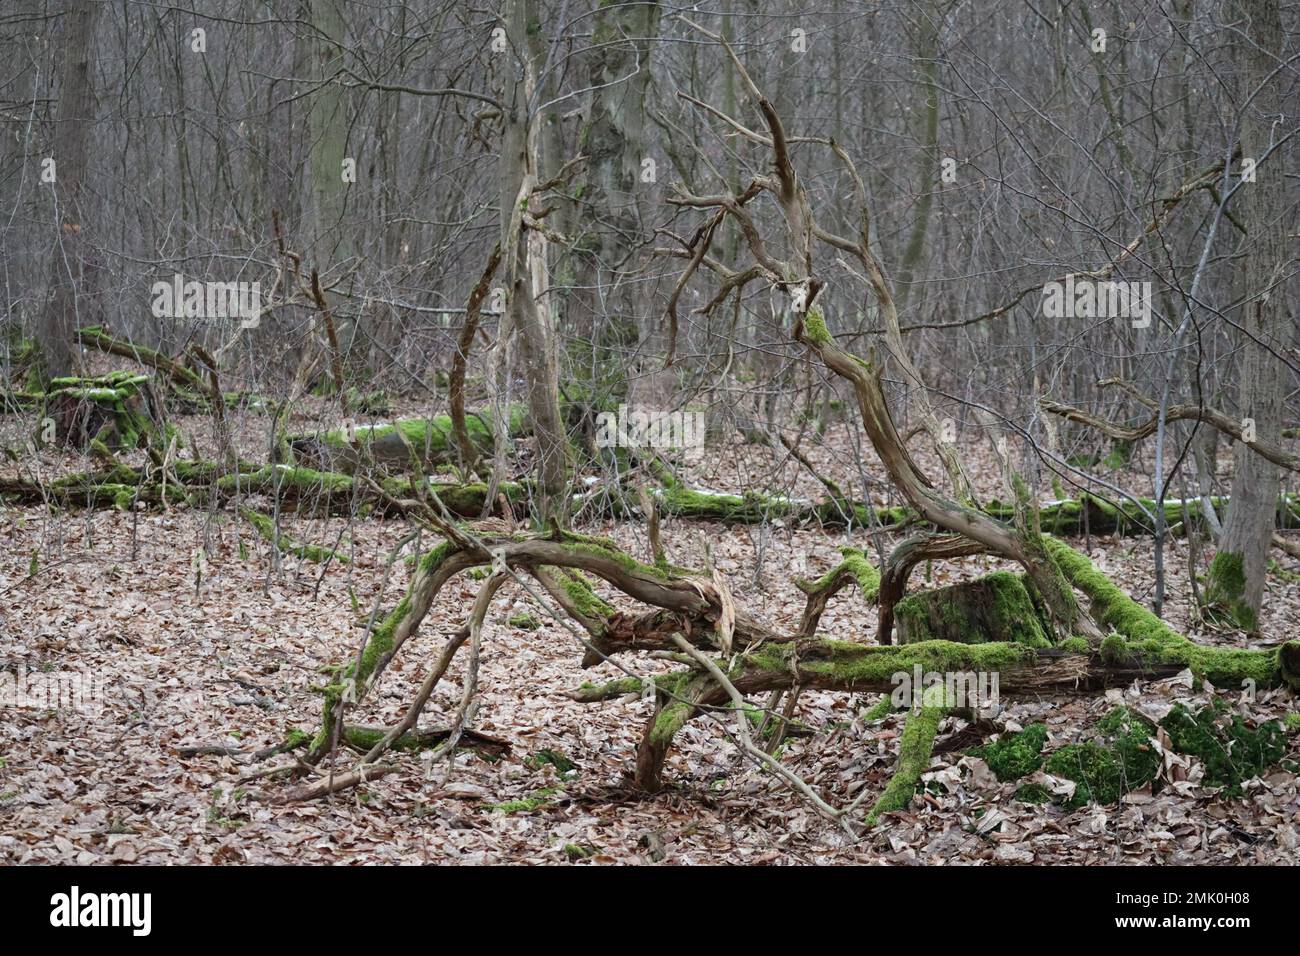 Deadwood, old Leaves, Moss and Tree stumps Stock Photo